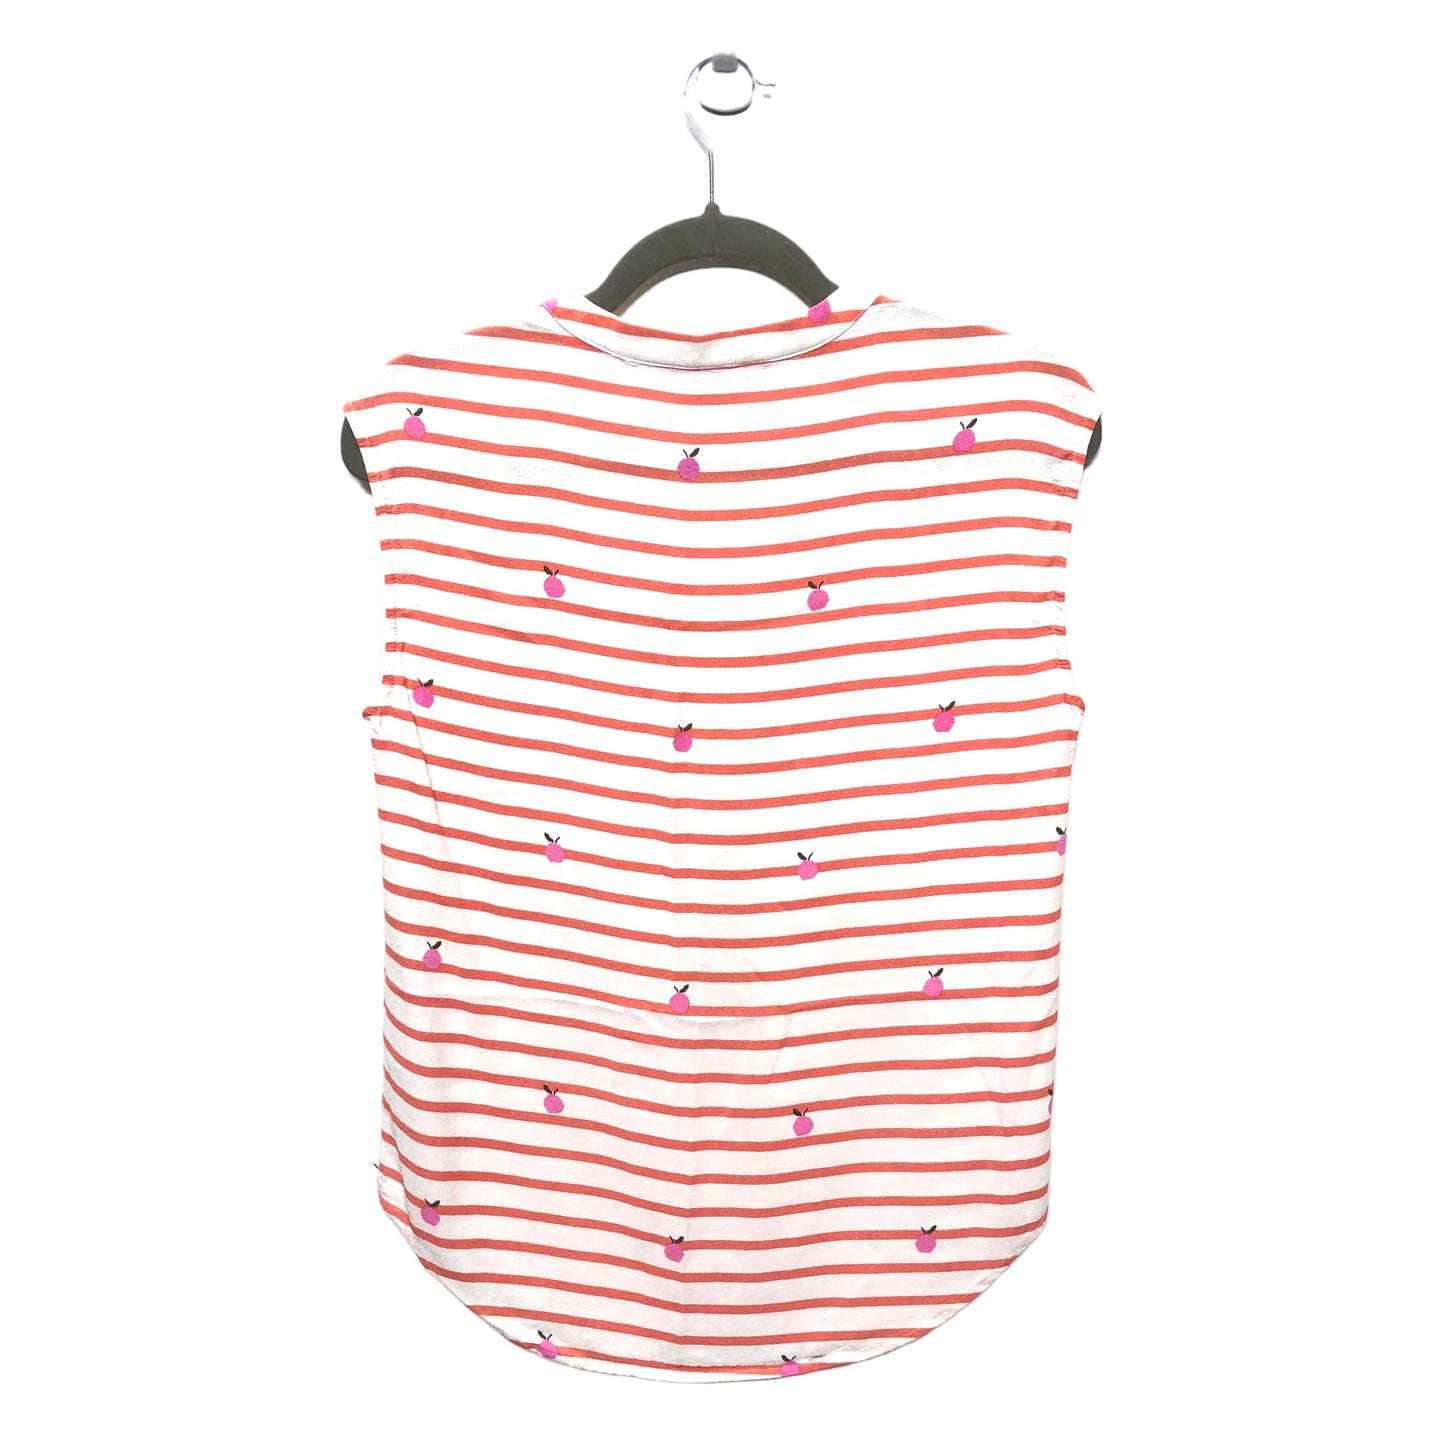 Top Sleeveless By Joules  Size: 6